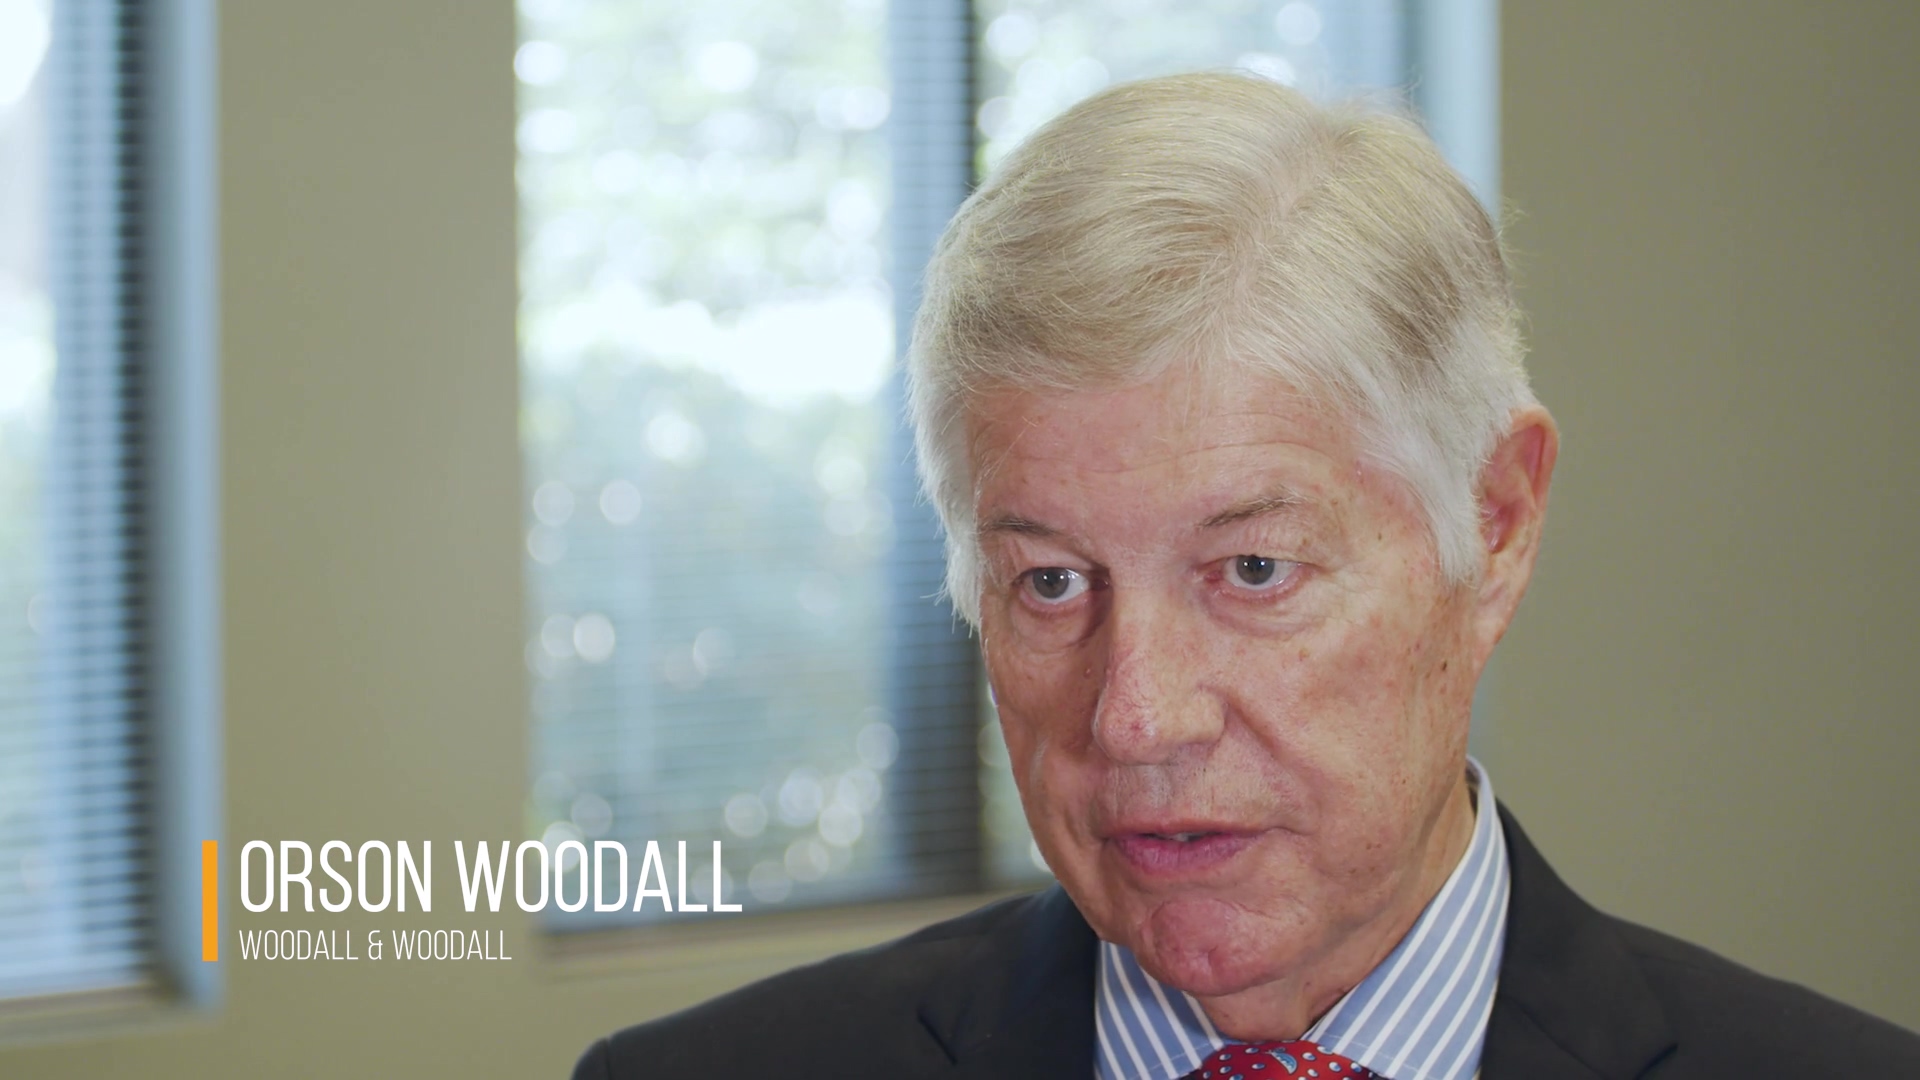 Why Choose Woodall and Woodall